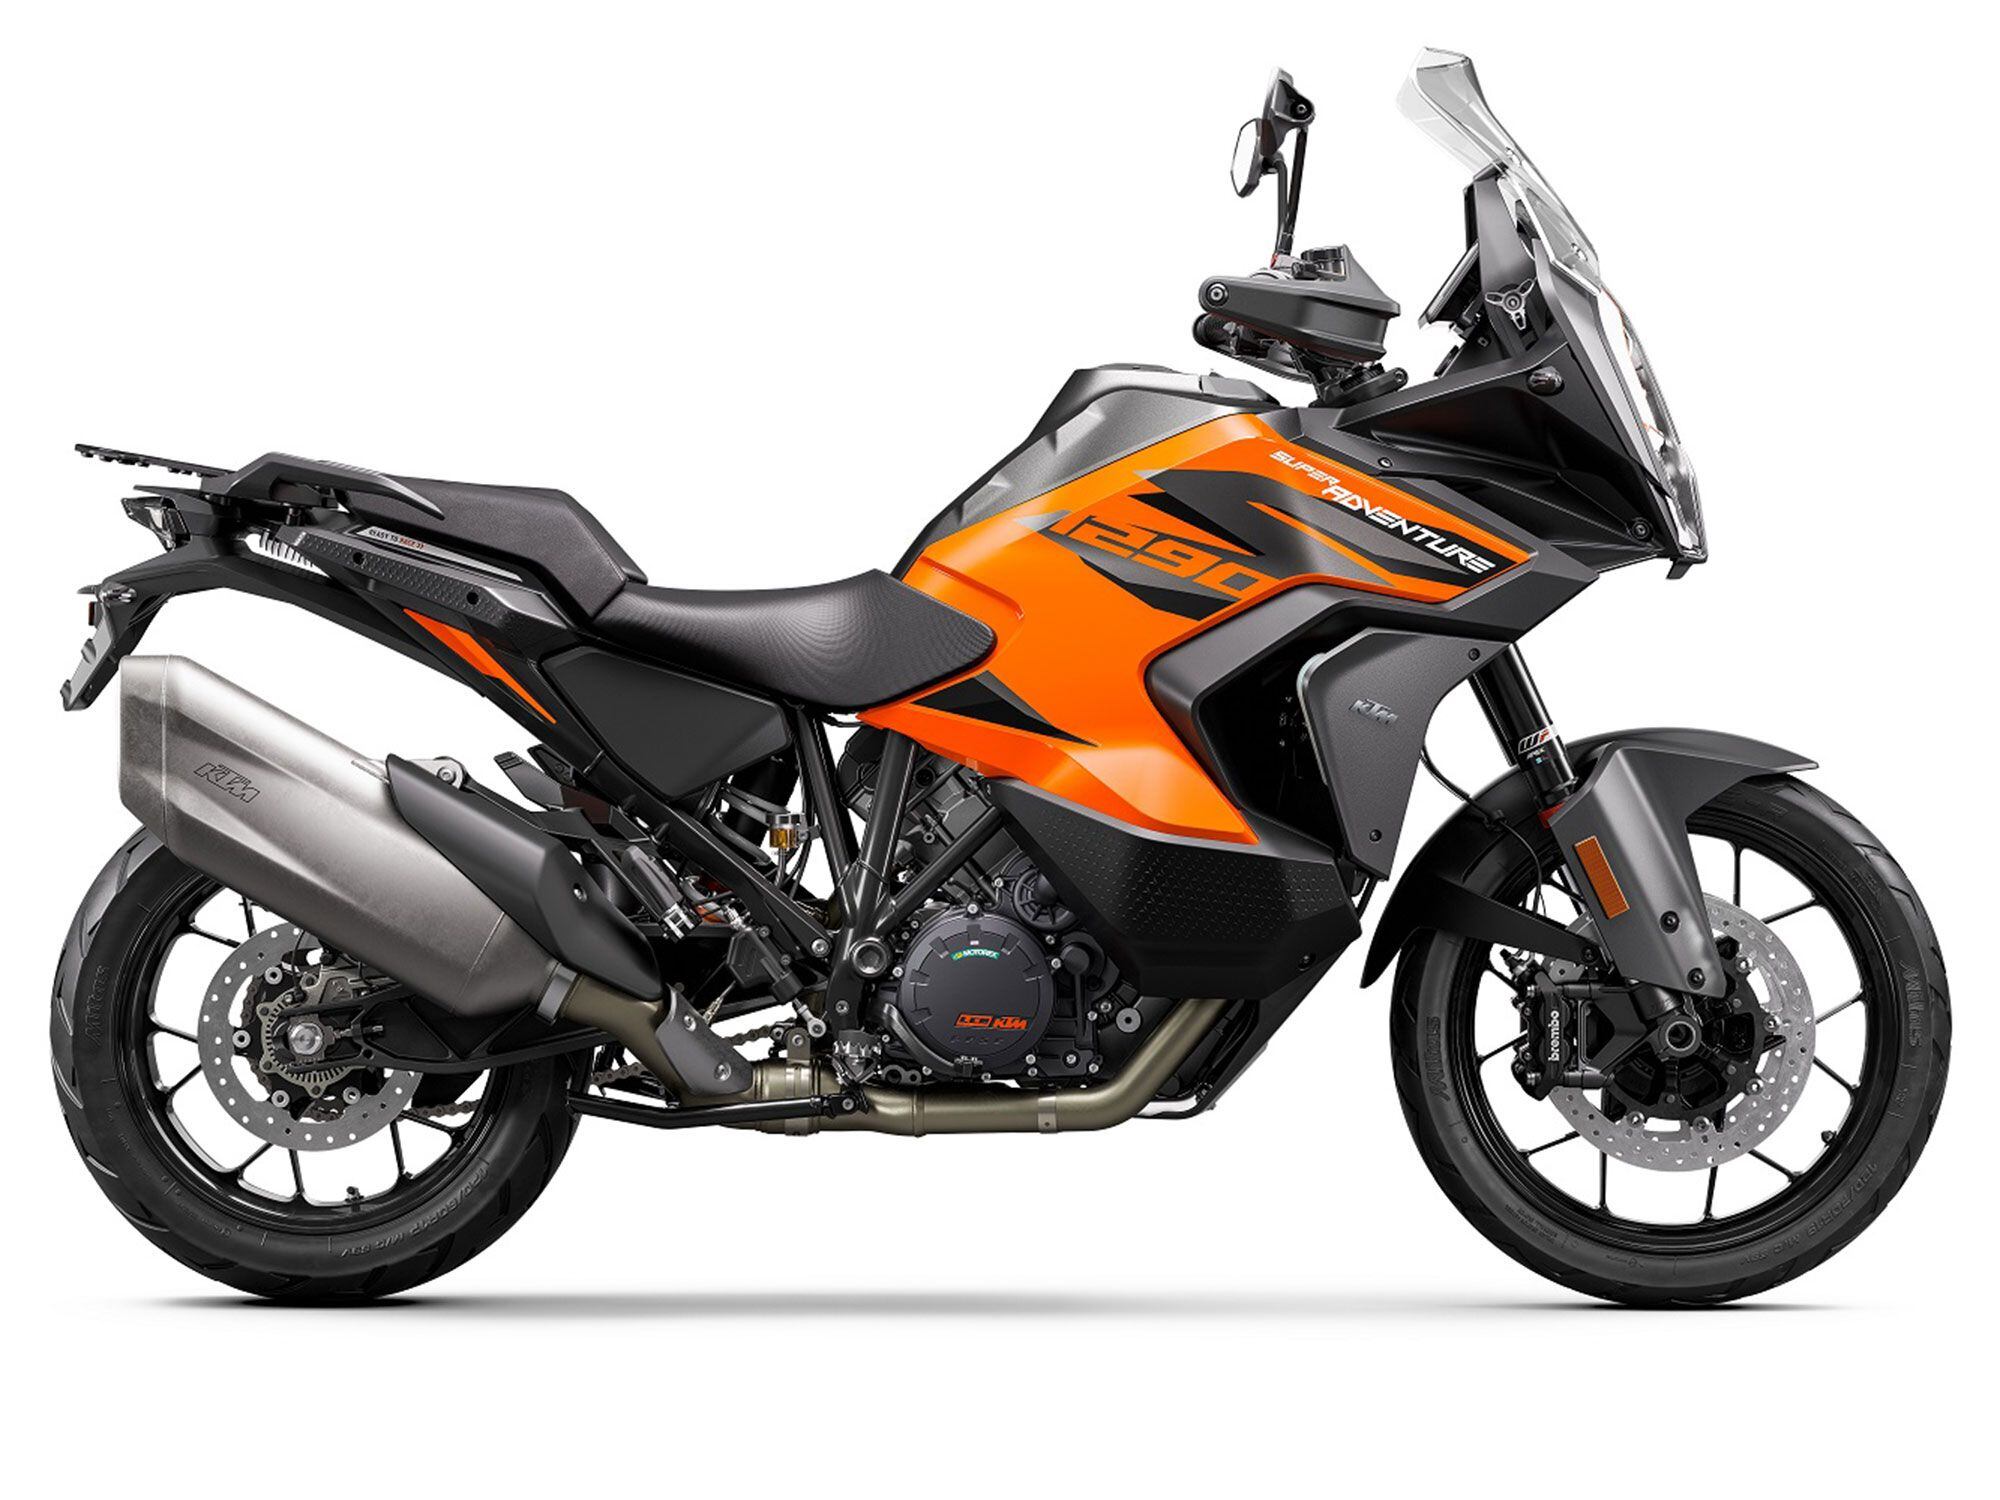 The separate launch date allows KTM to focus on the base model’s merits (lighter weight, lower price) without the distractions of the higher-tech R and S bikes. (The 1290 S is shown.)